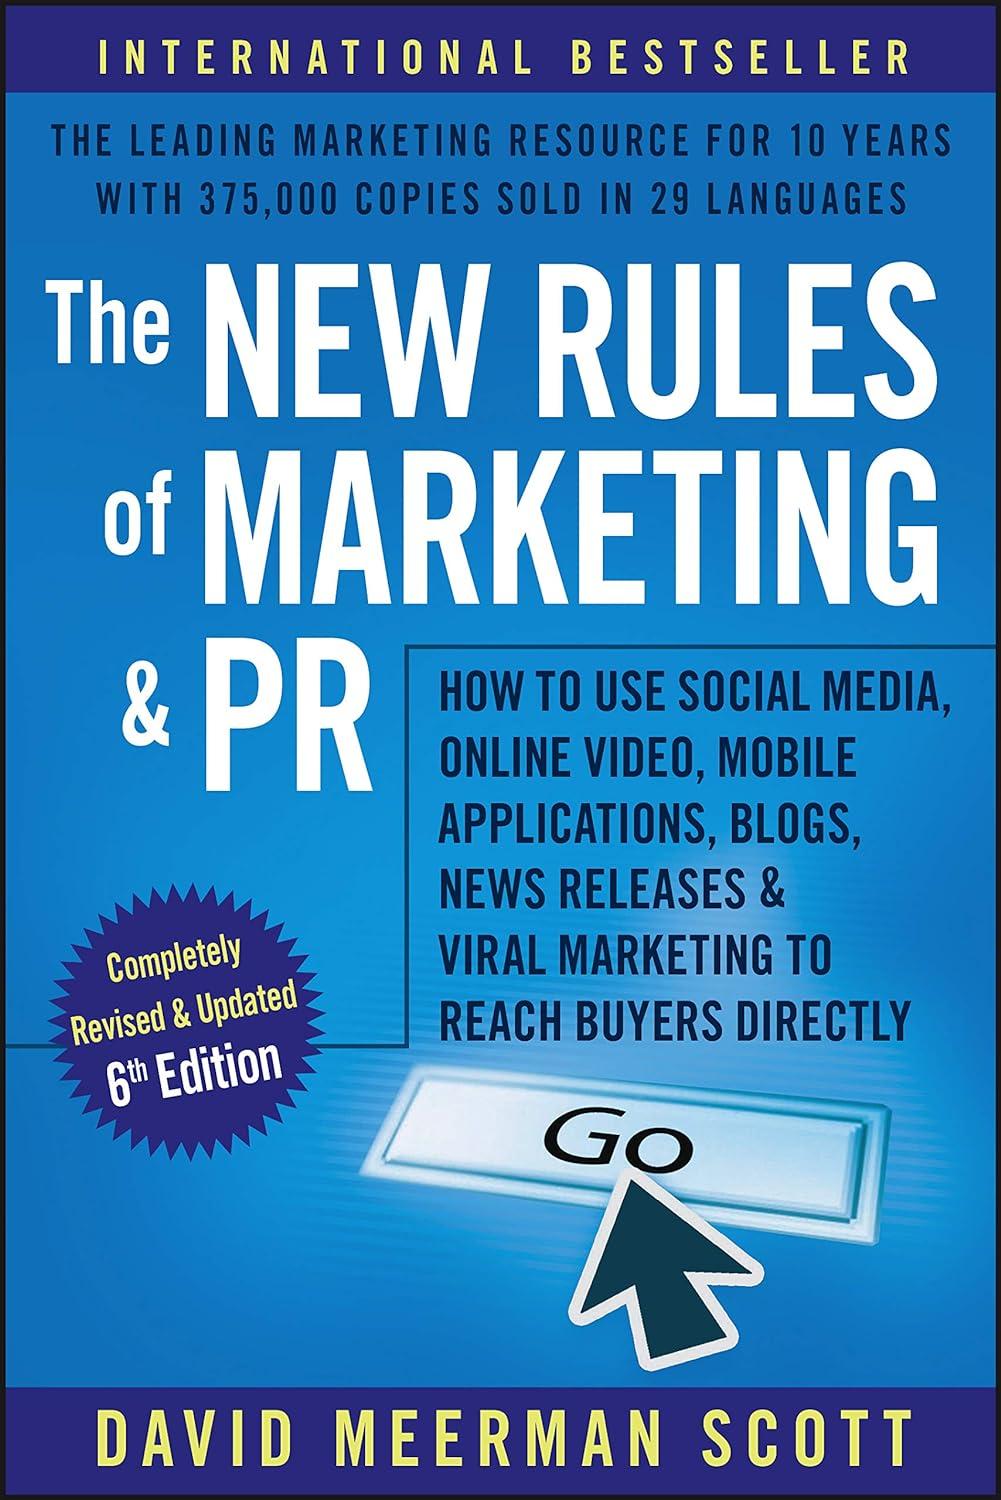 the new rules of marketing and pr how to use social media  online video  mobile applications  blogs  news